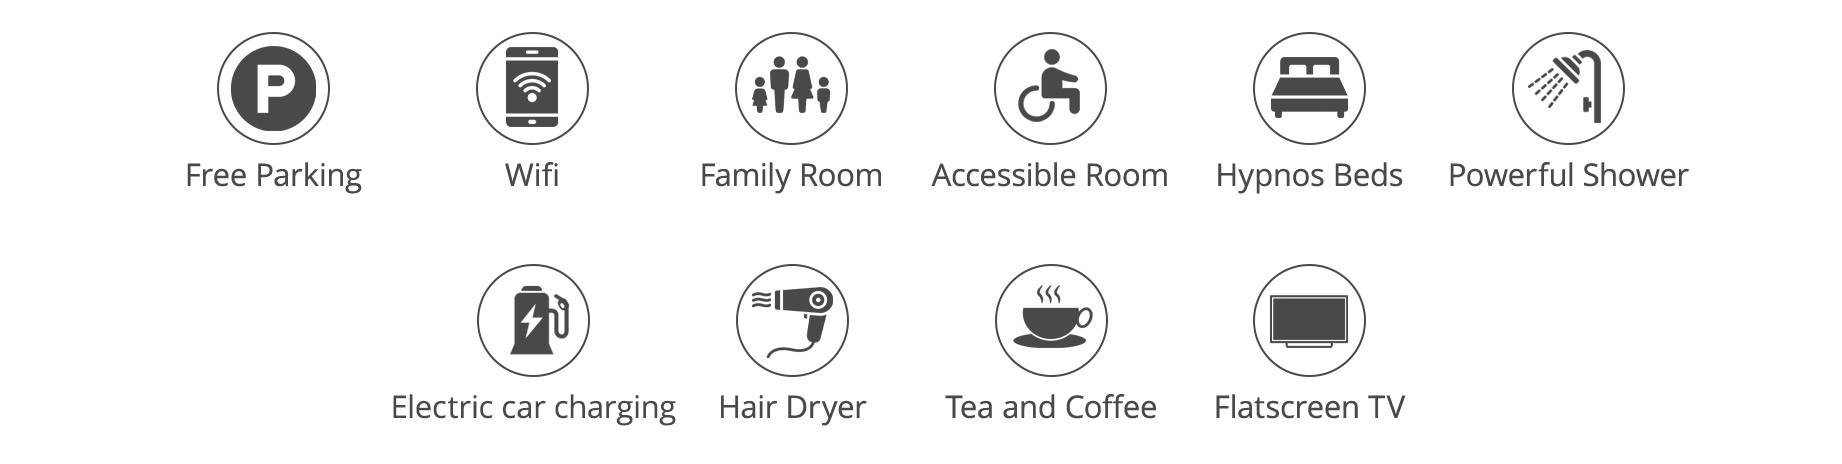 Facilities available icons